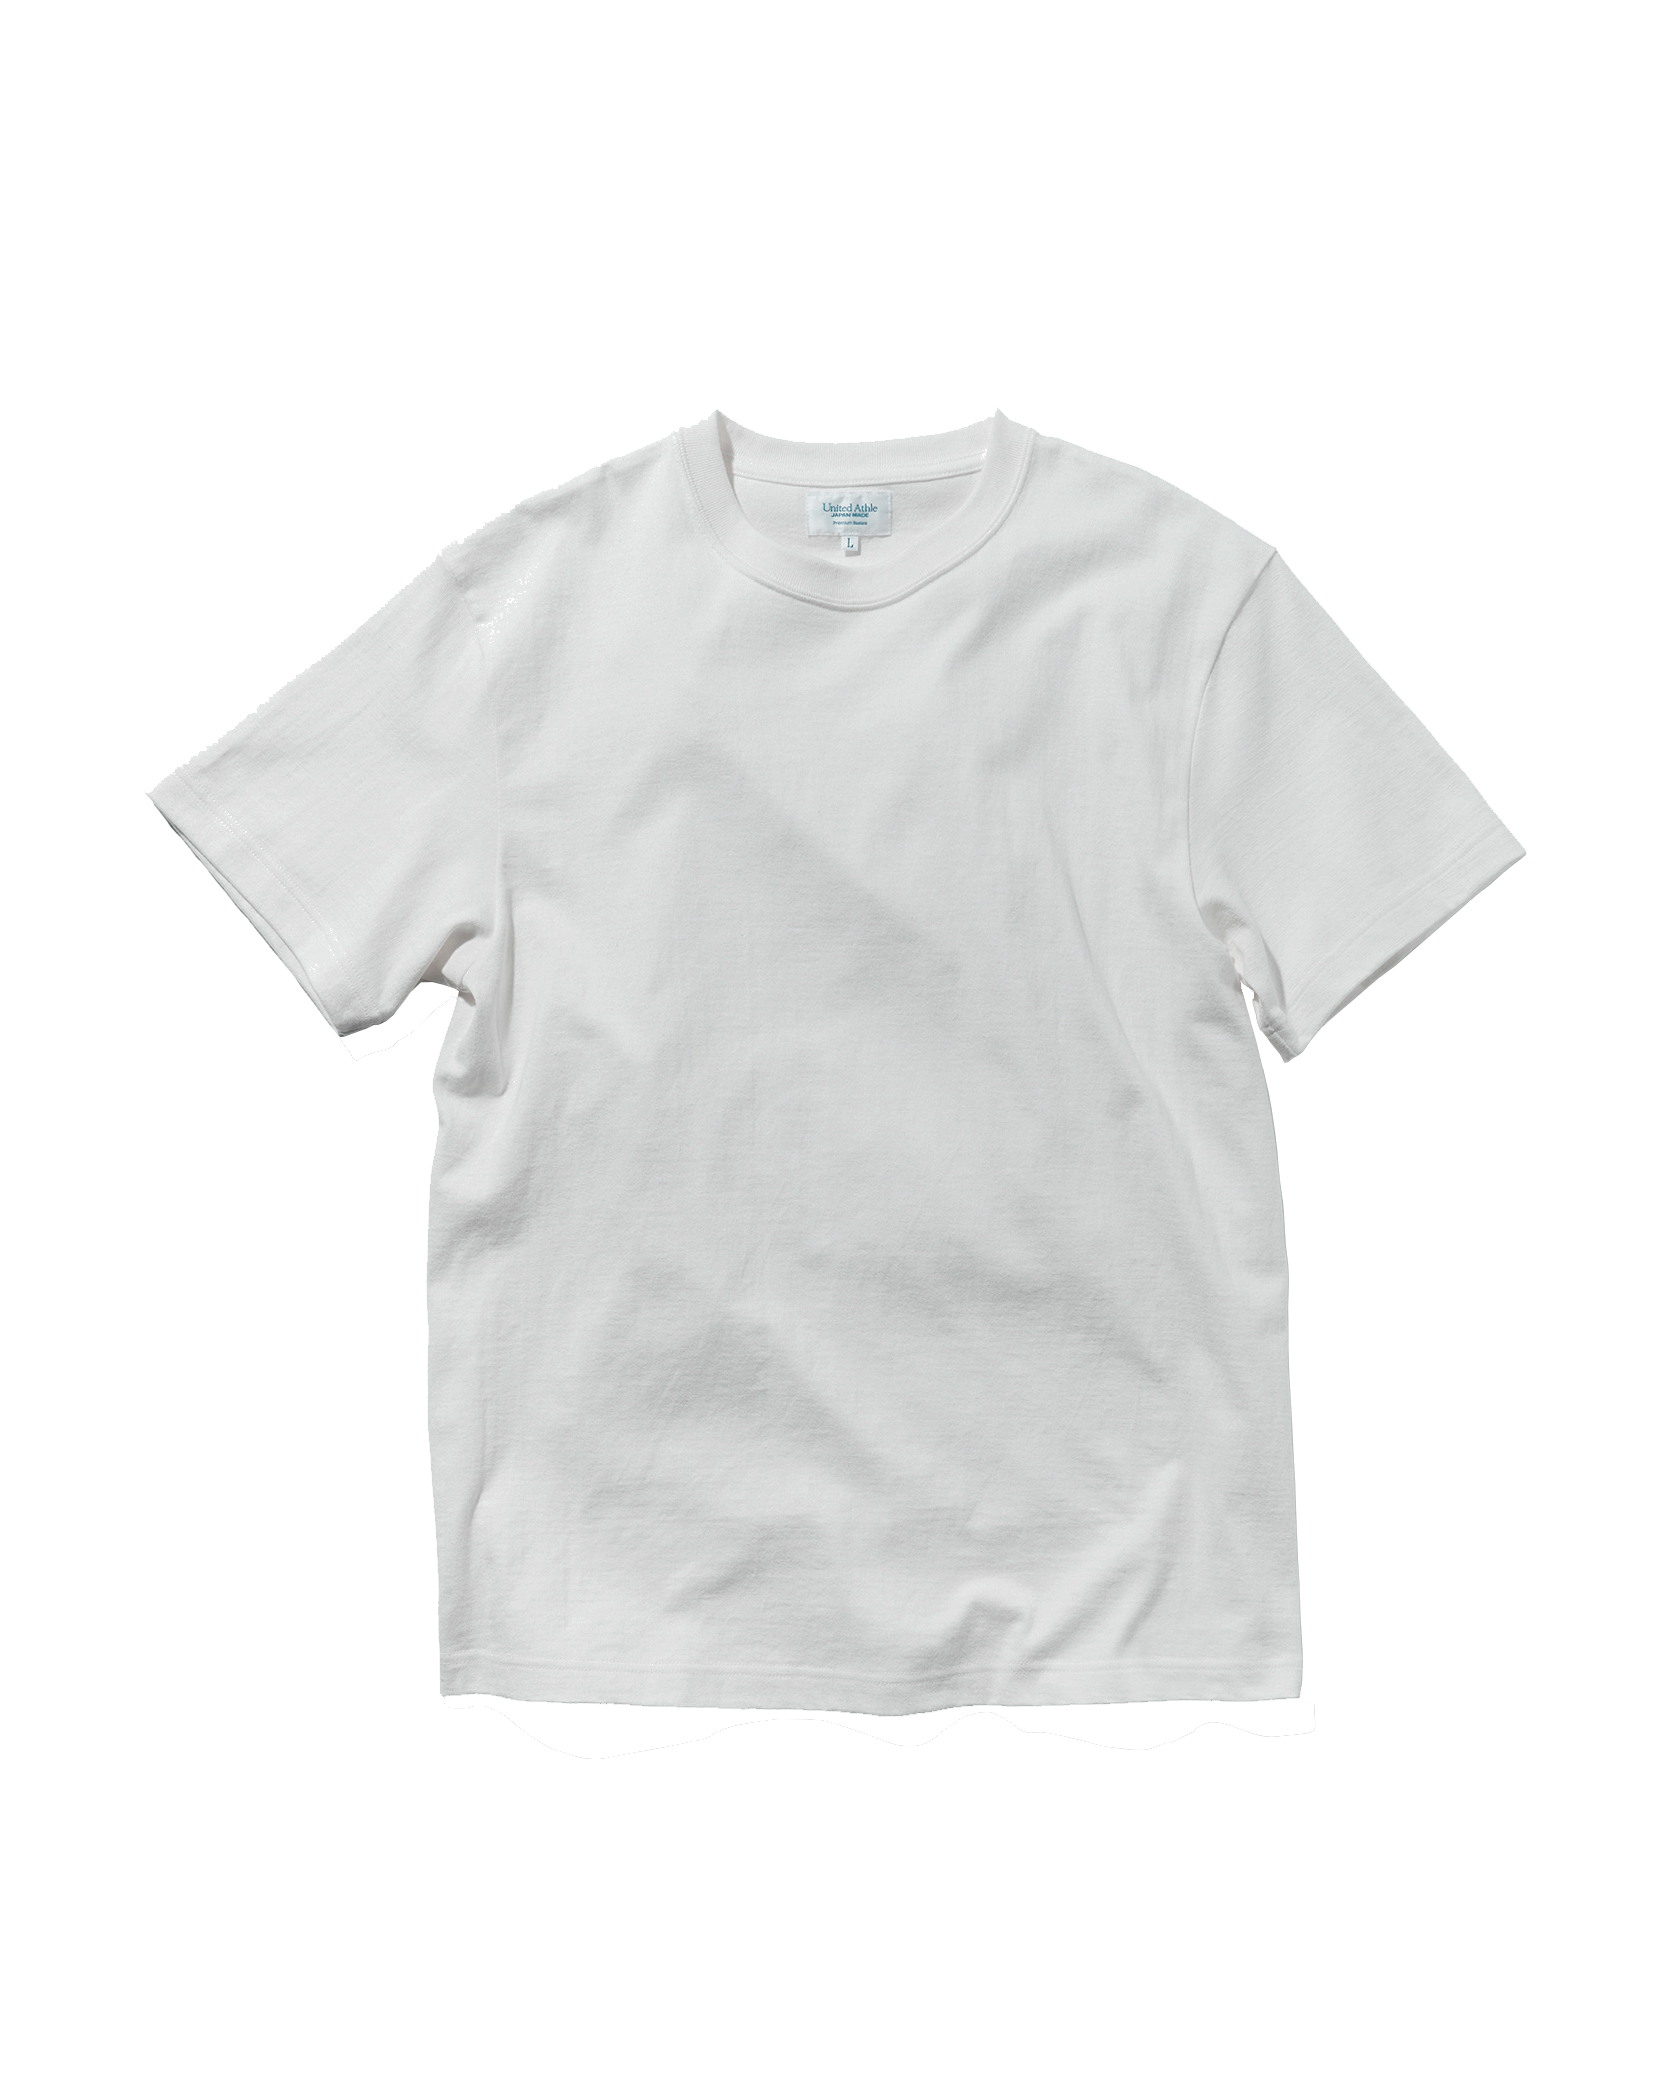 80003 - Japan Made - Wide Fit T-shirt - White x 1